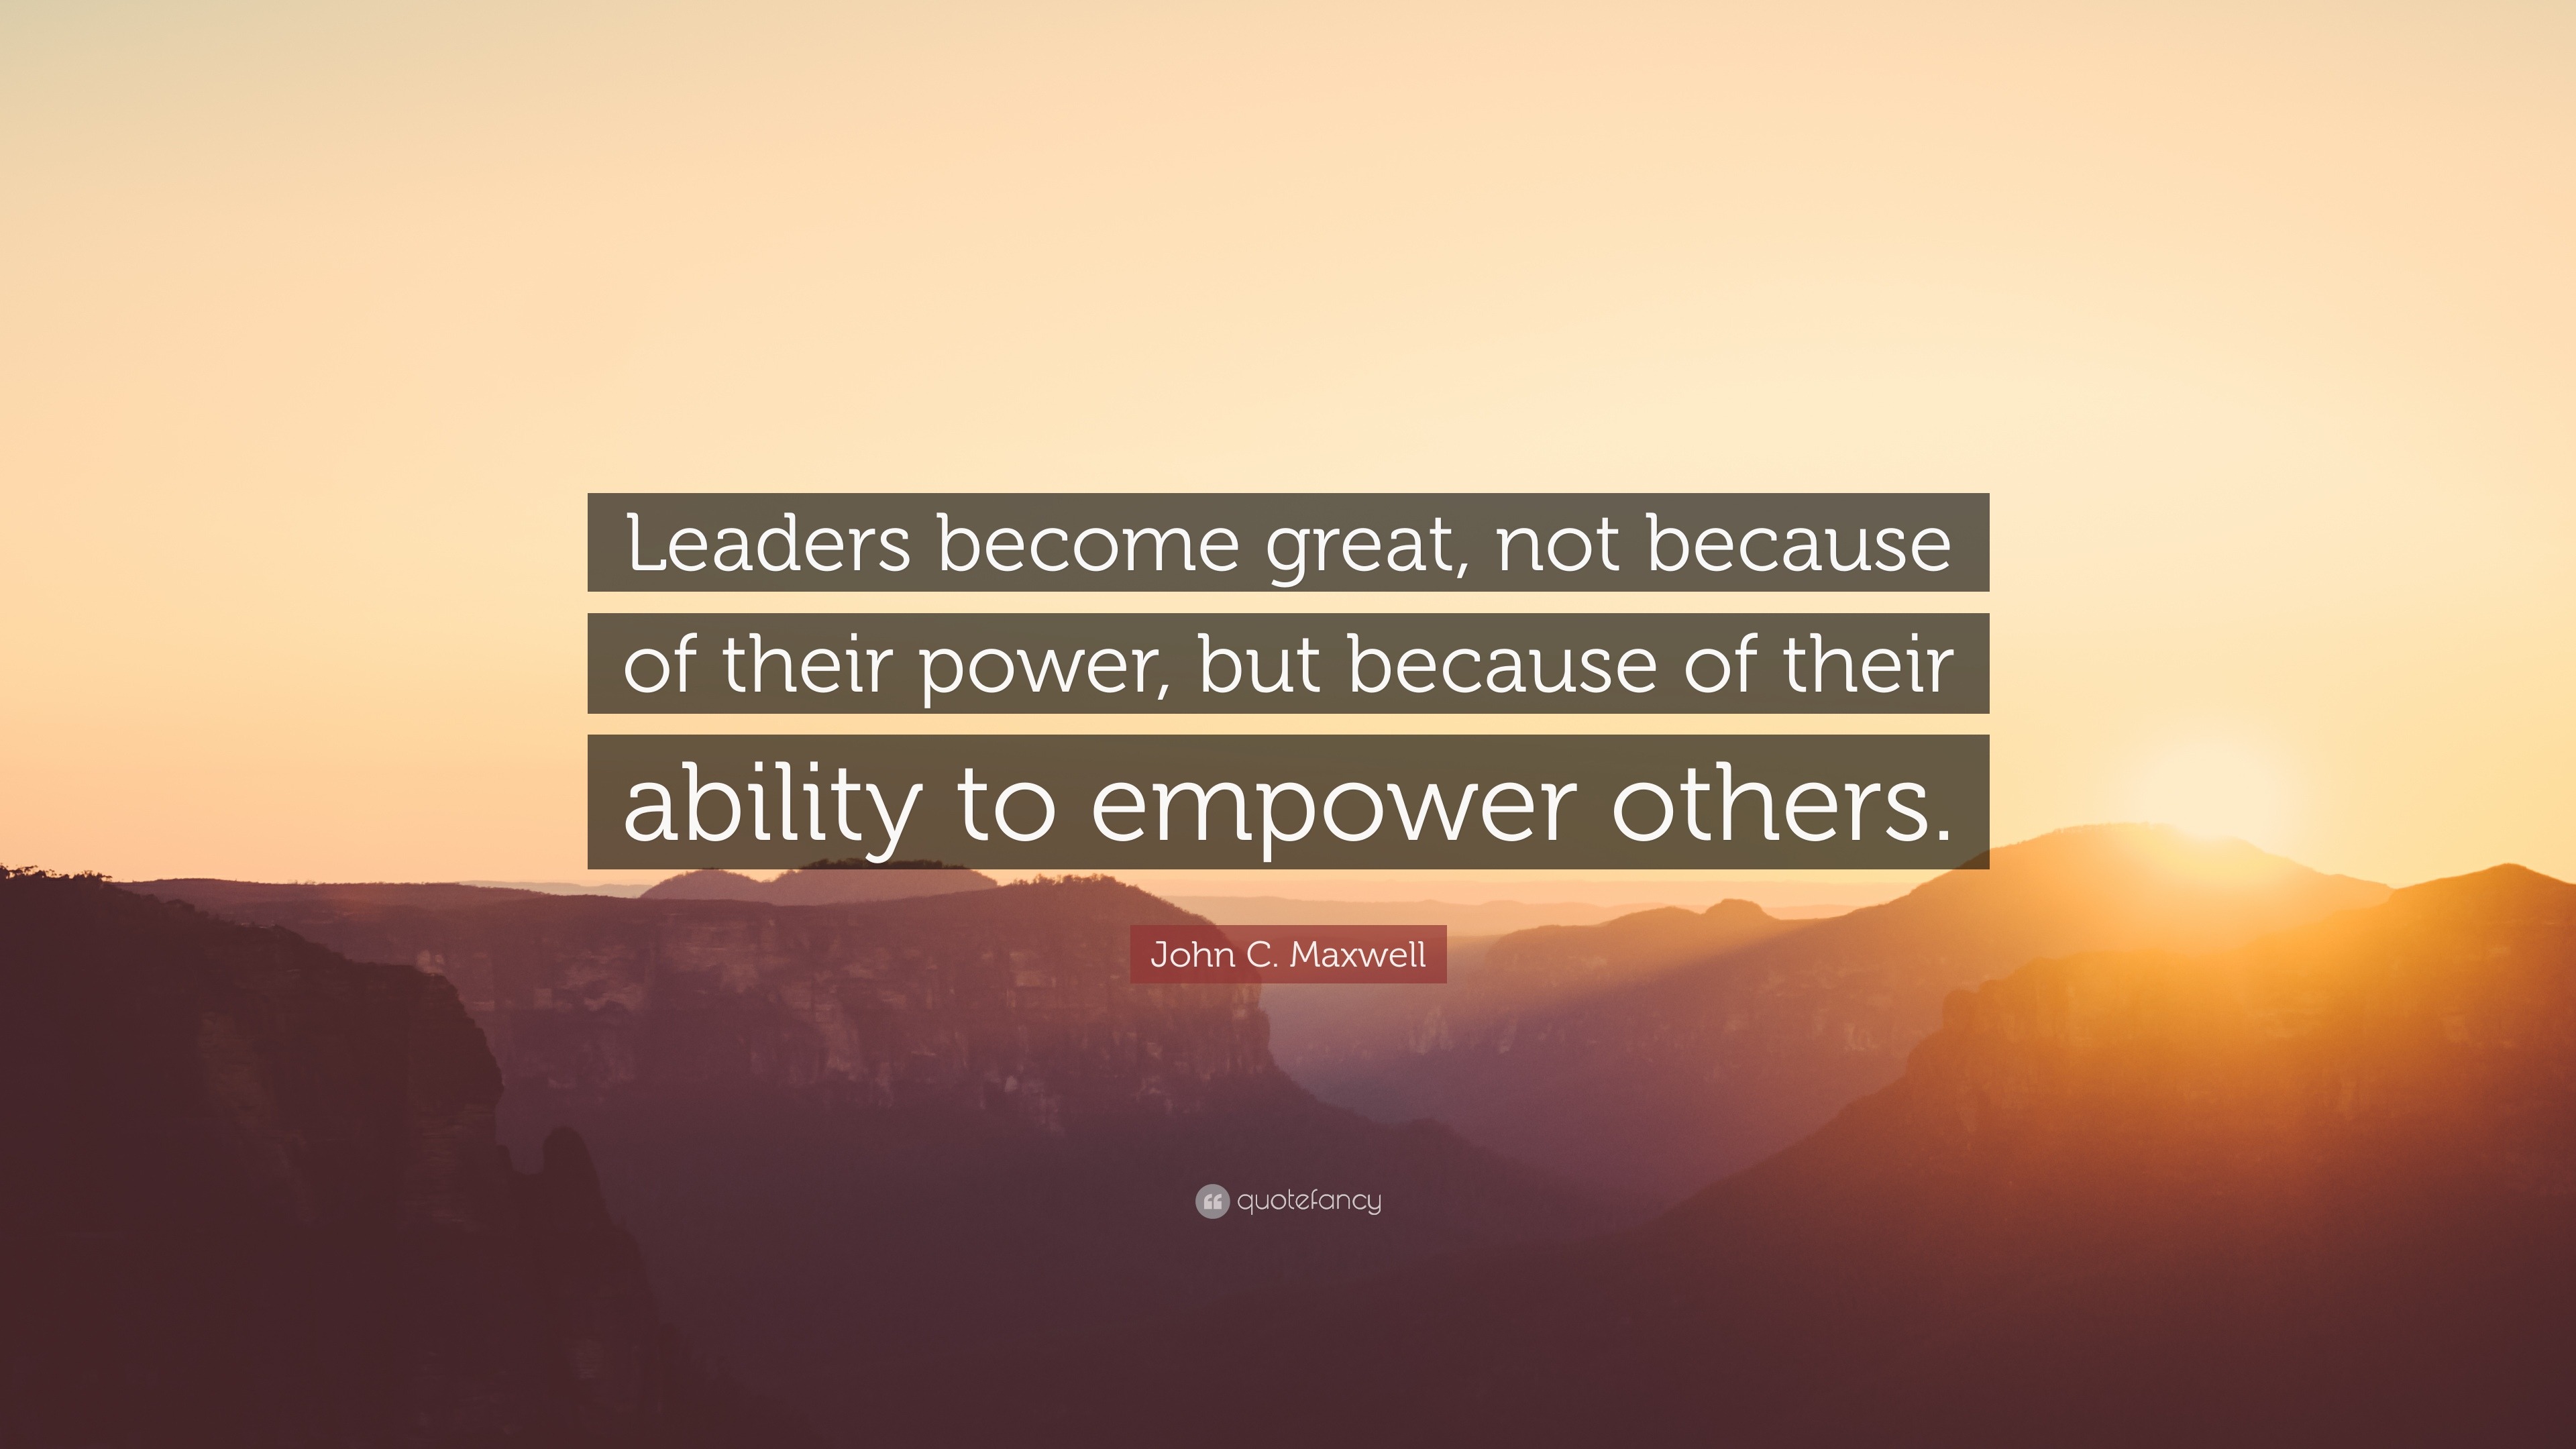 boss gift Leaders become great not because of their power but because of their ability to empower others leader inspirational quote